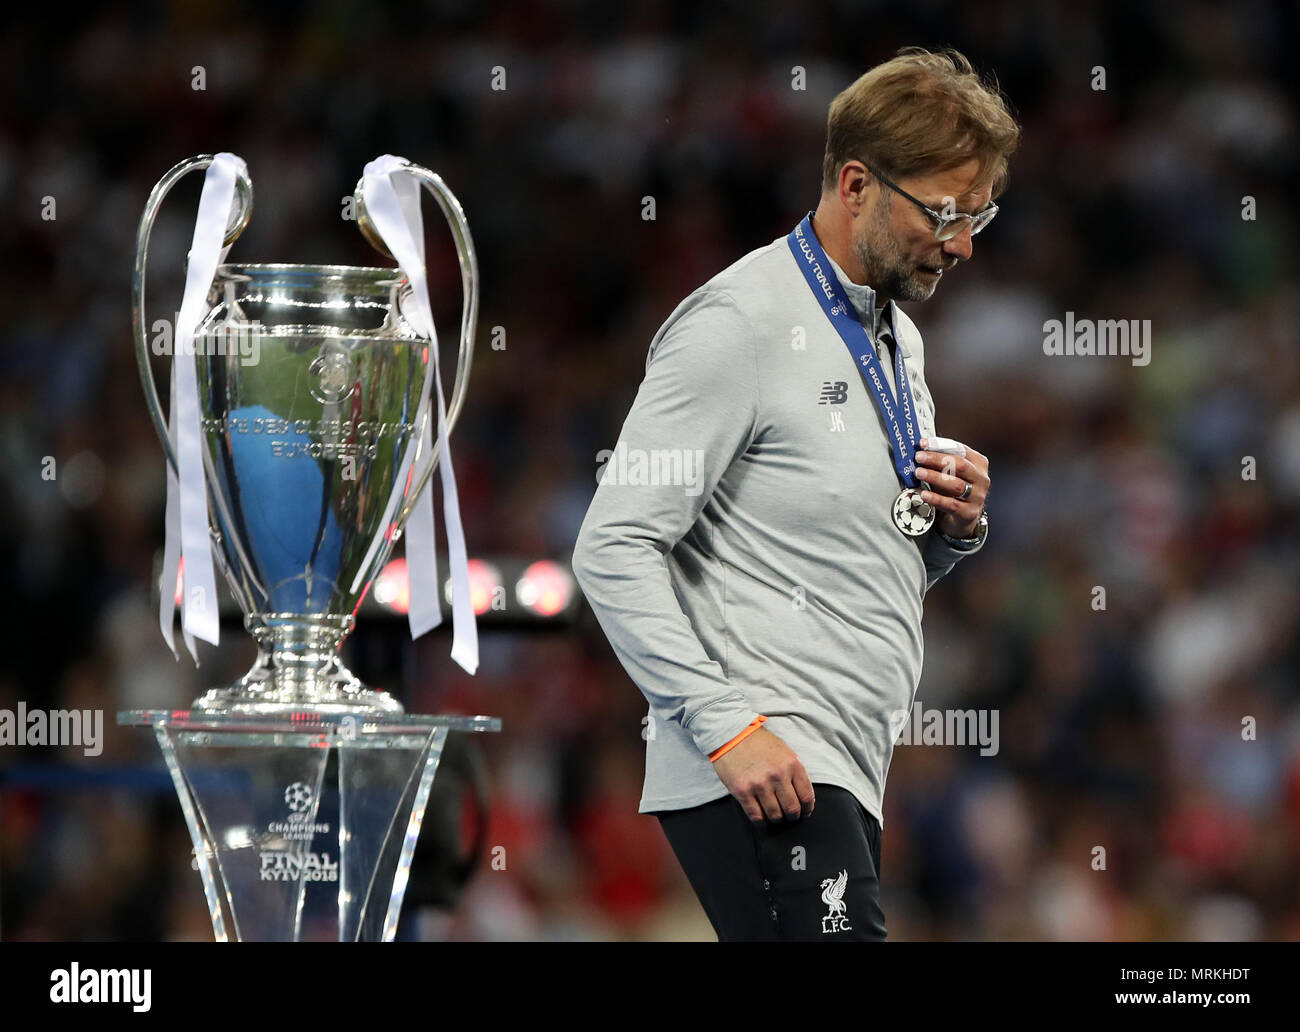 The Tottenham legend has approached Klopp with a proposal to replay the  2018/19 UCL final